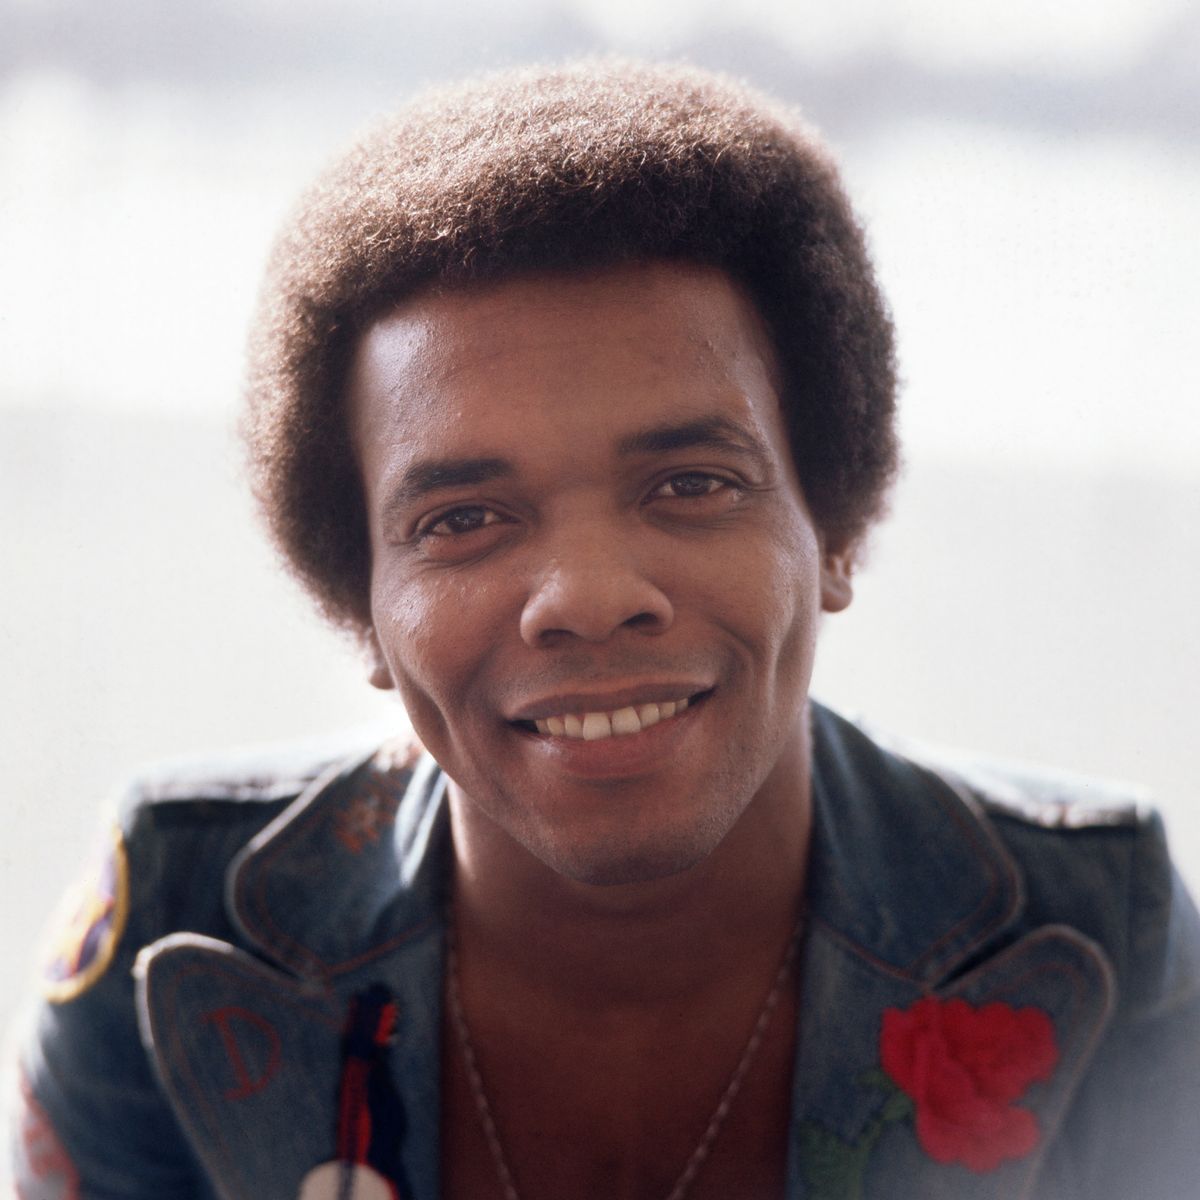 Johnny Nash, 'I Can See Clearly Now' Singer, Dead At 80